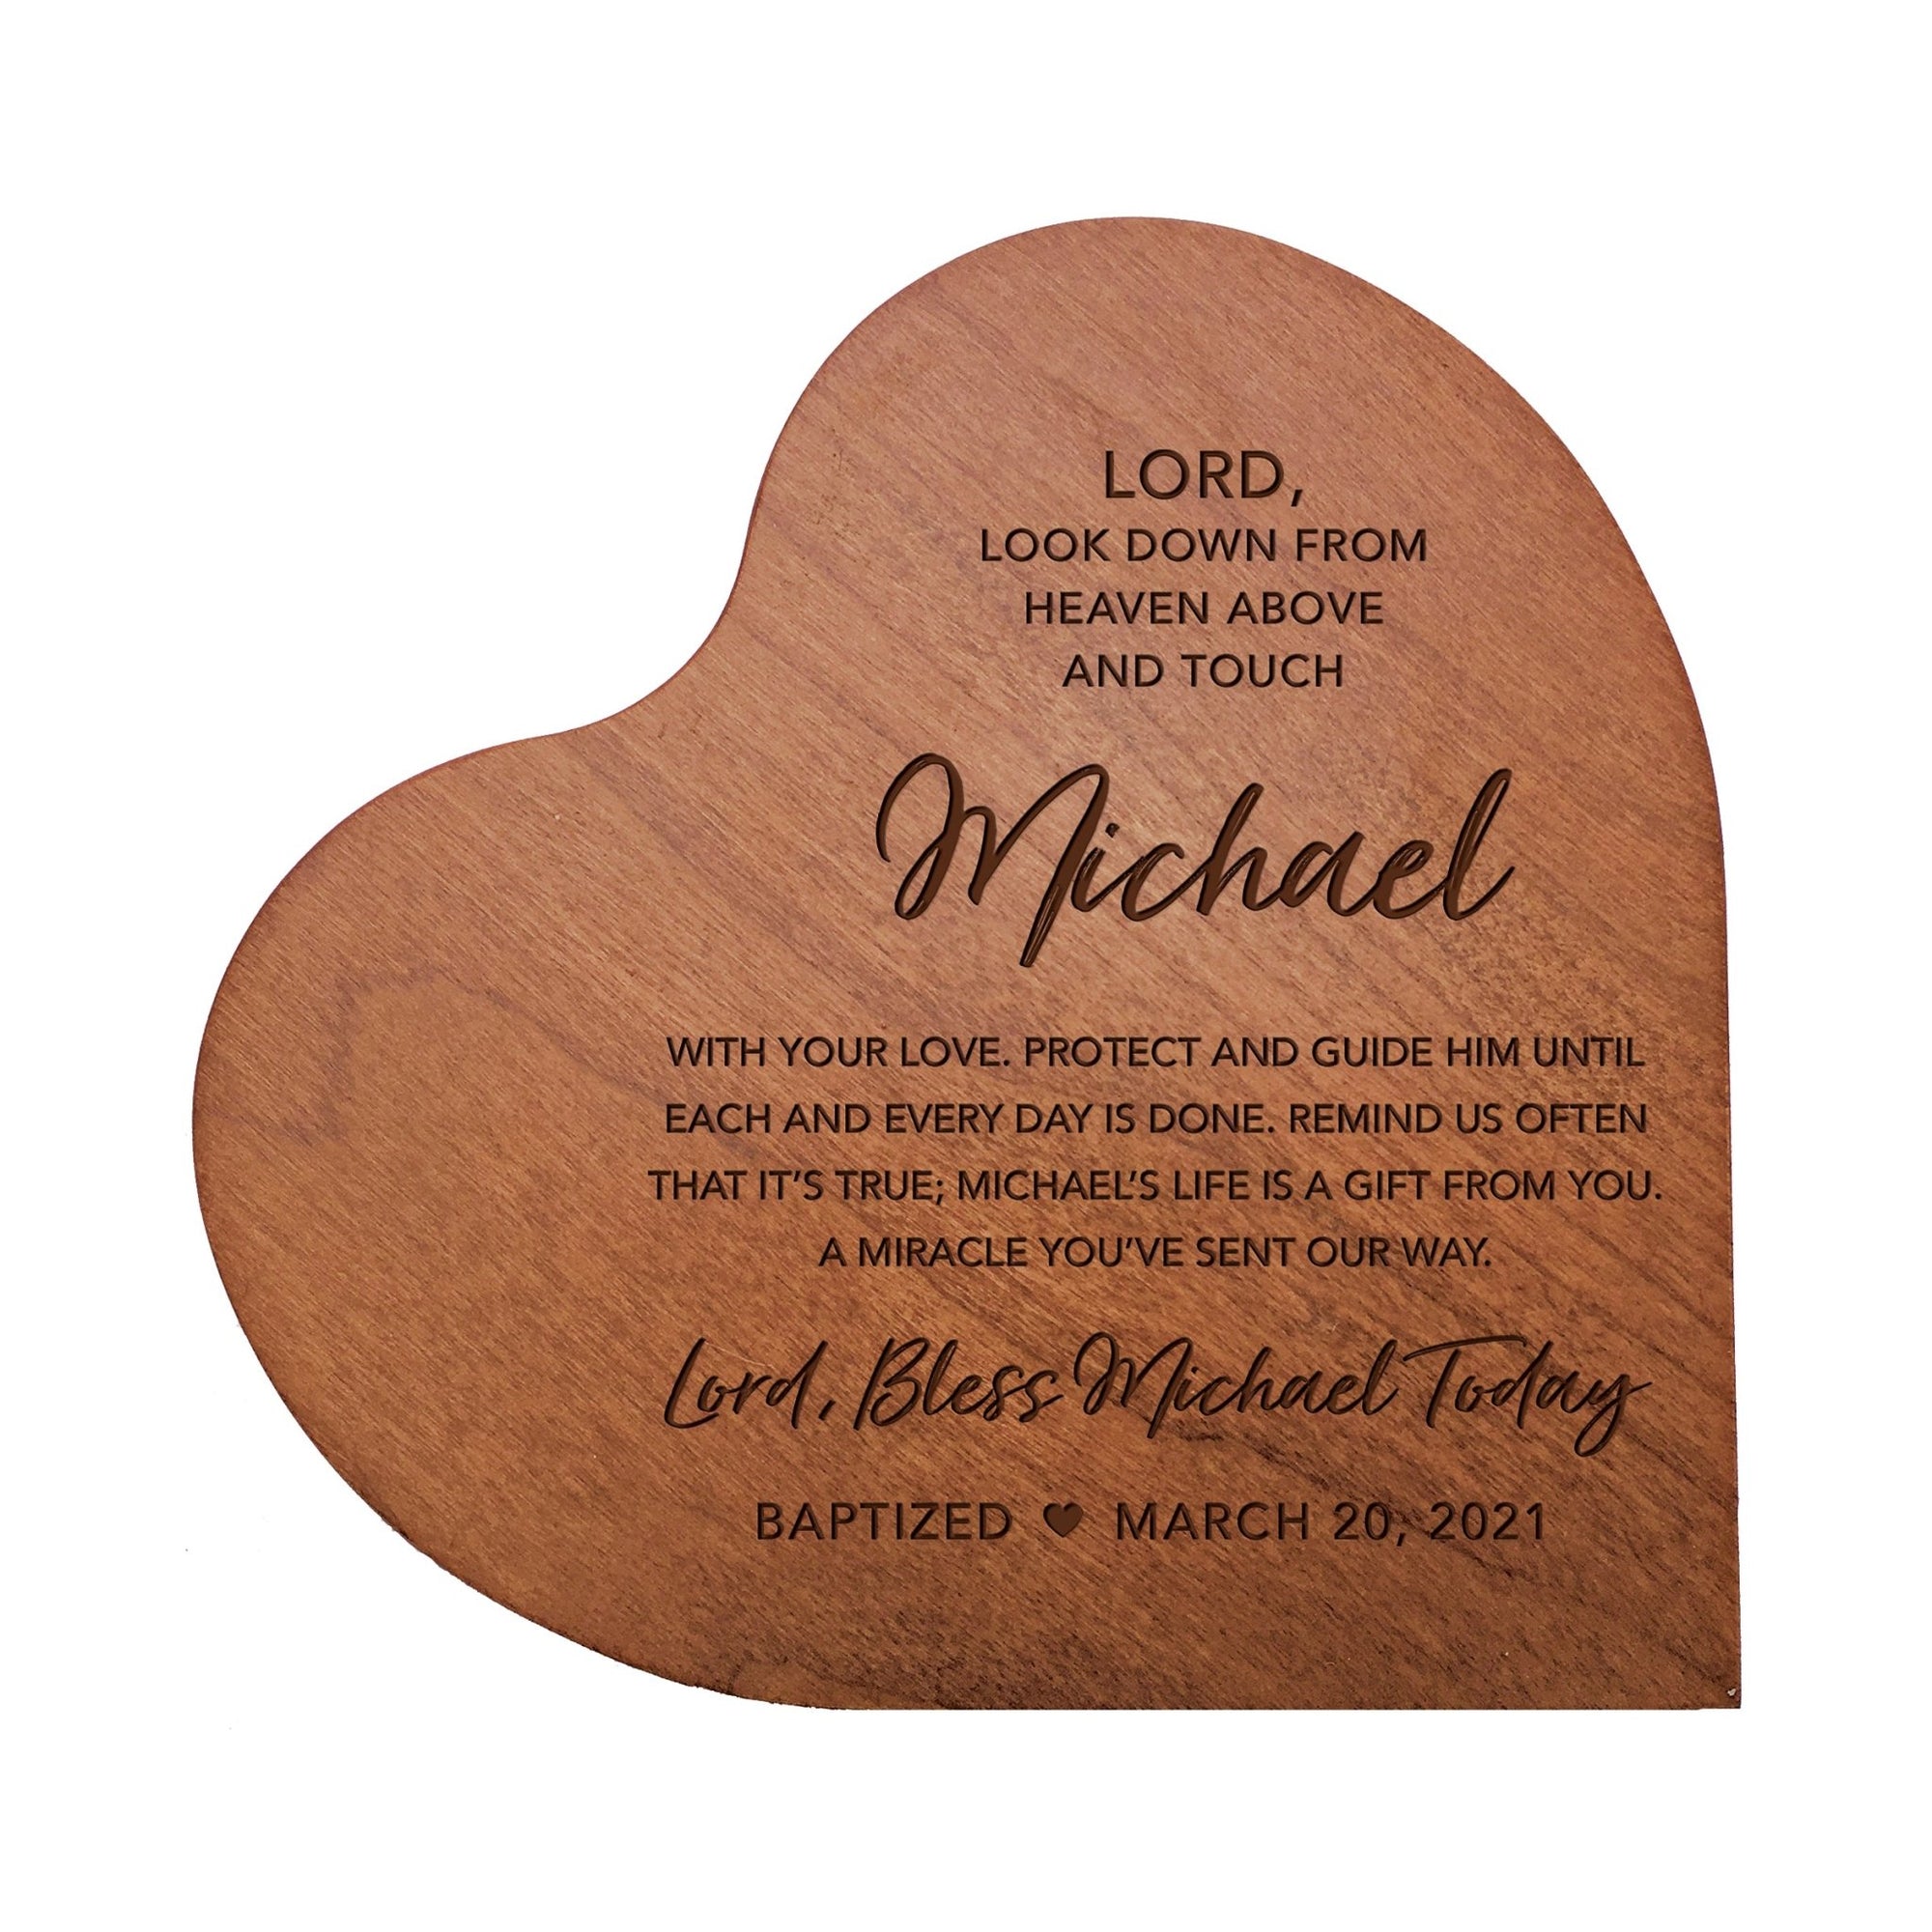 Personalized Baptism Solid Wood Heart Decoration With Inspirational Verse Keepsake Gift 5x5.25 - Lord Look Down - LifeSong Milestones